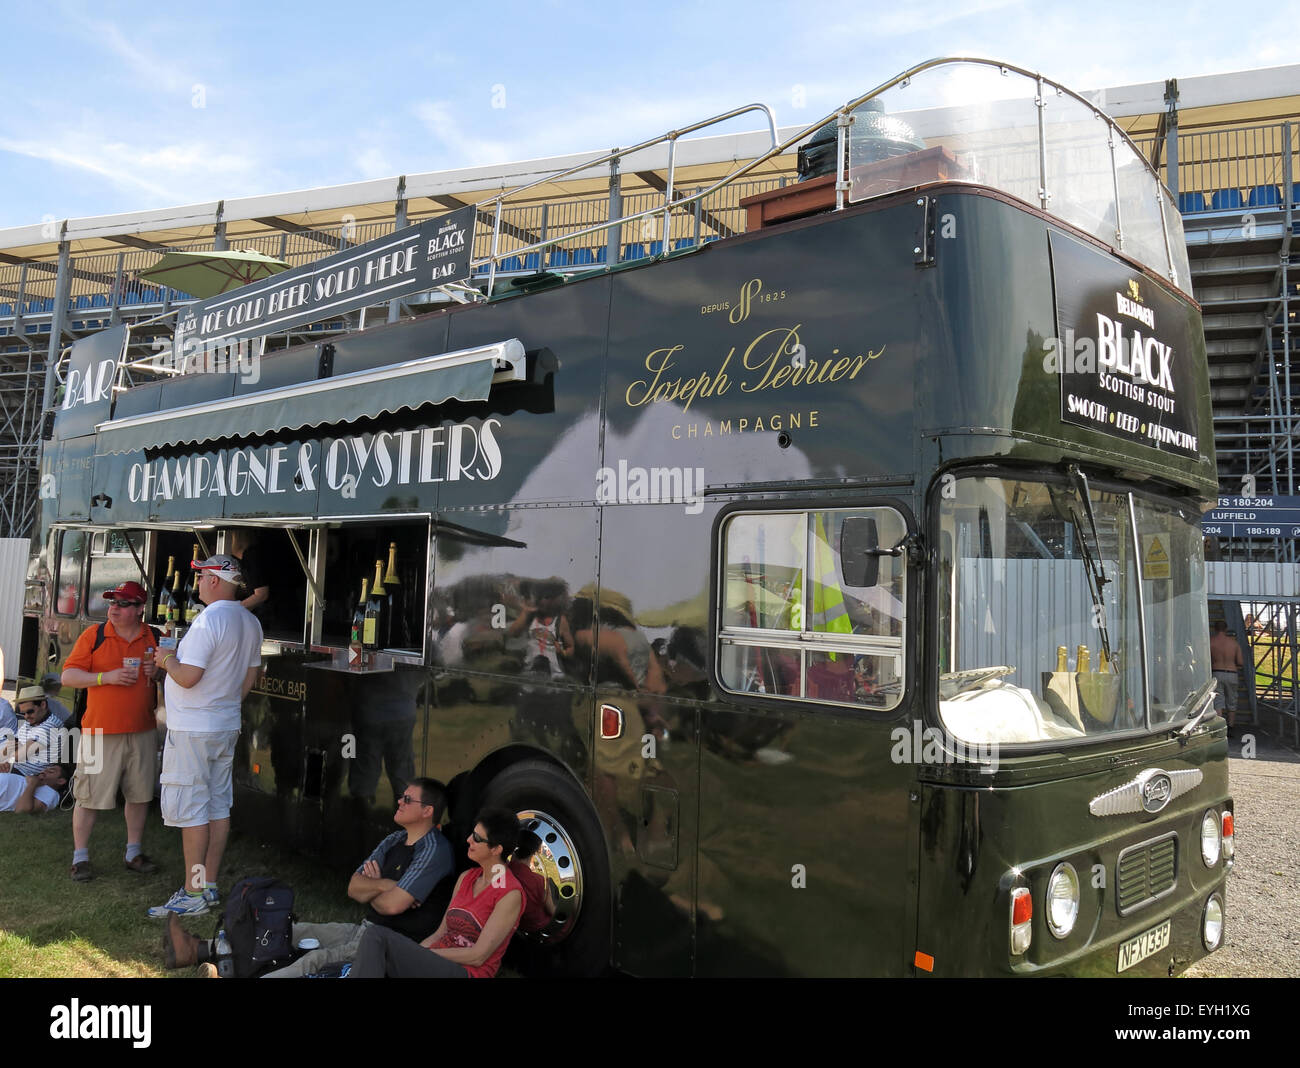 Black bus,Joseph Perrier Champagne and Oyster bar at an event, England, Uk Stock Photo